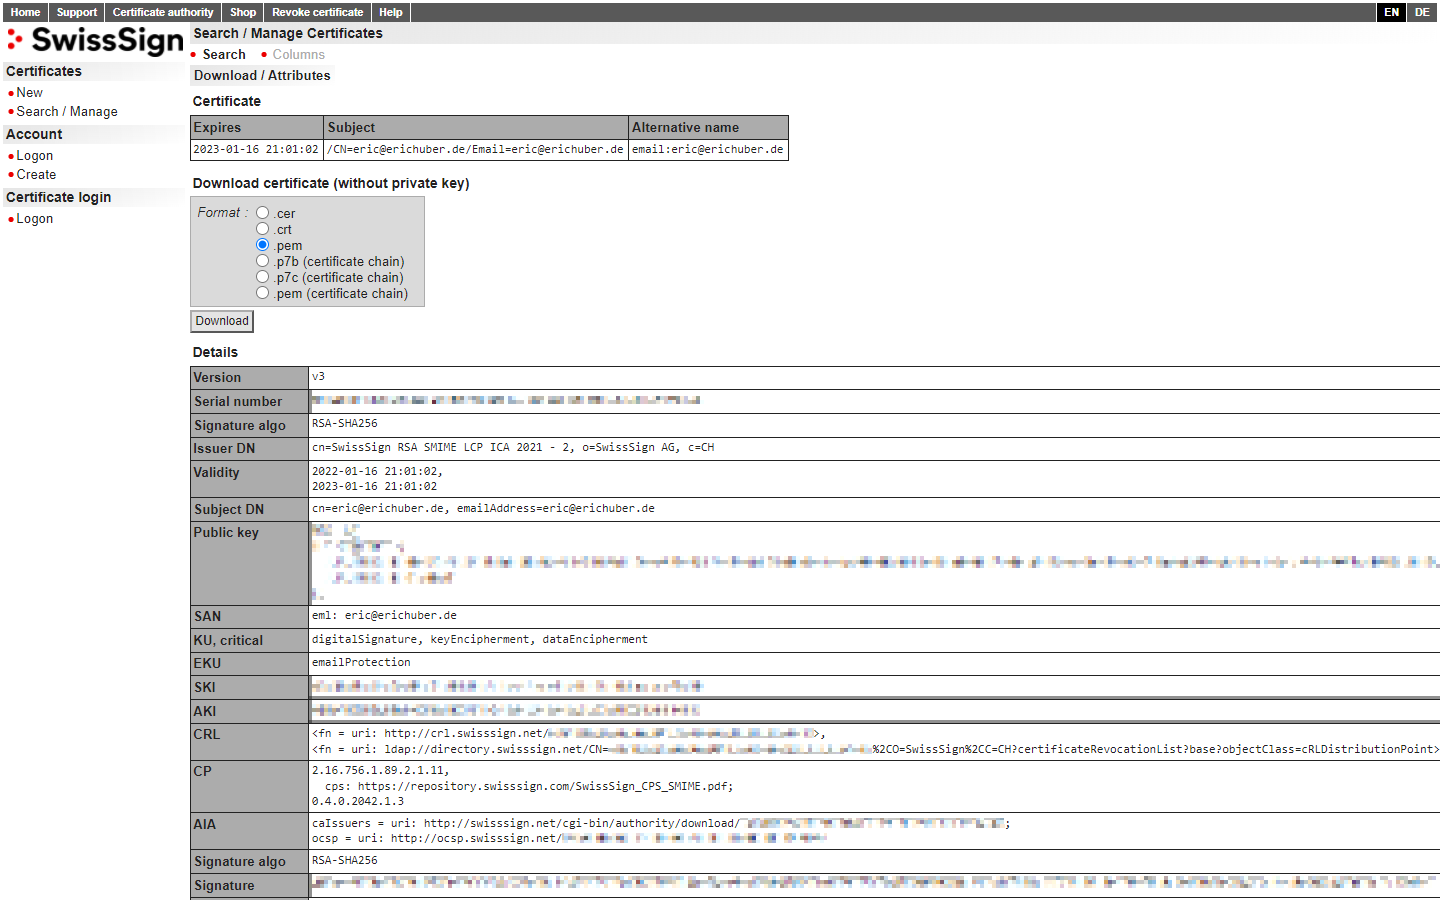 Picture of the SwissSign "Download / Attributes" page with .pem selected as the download format